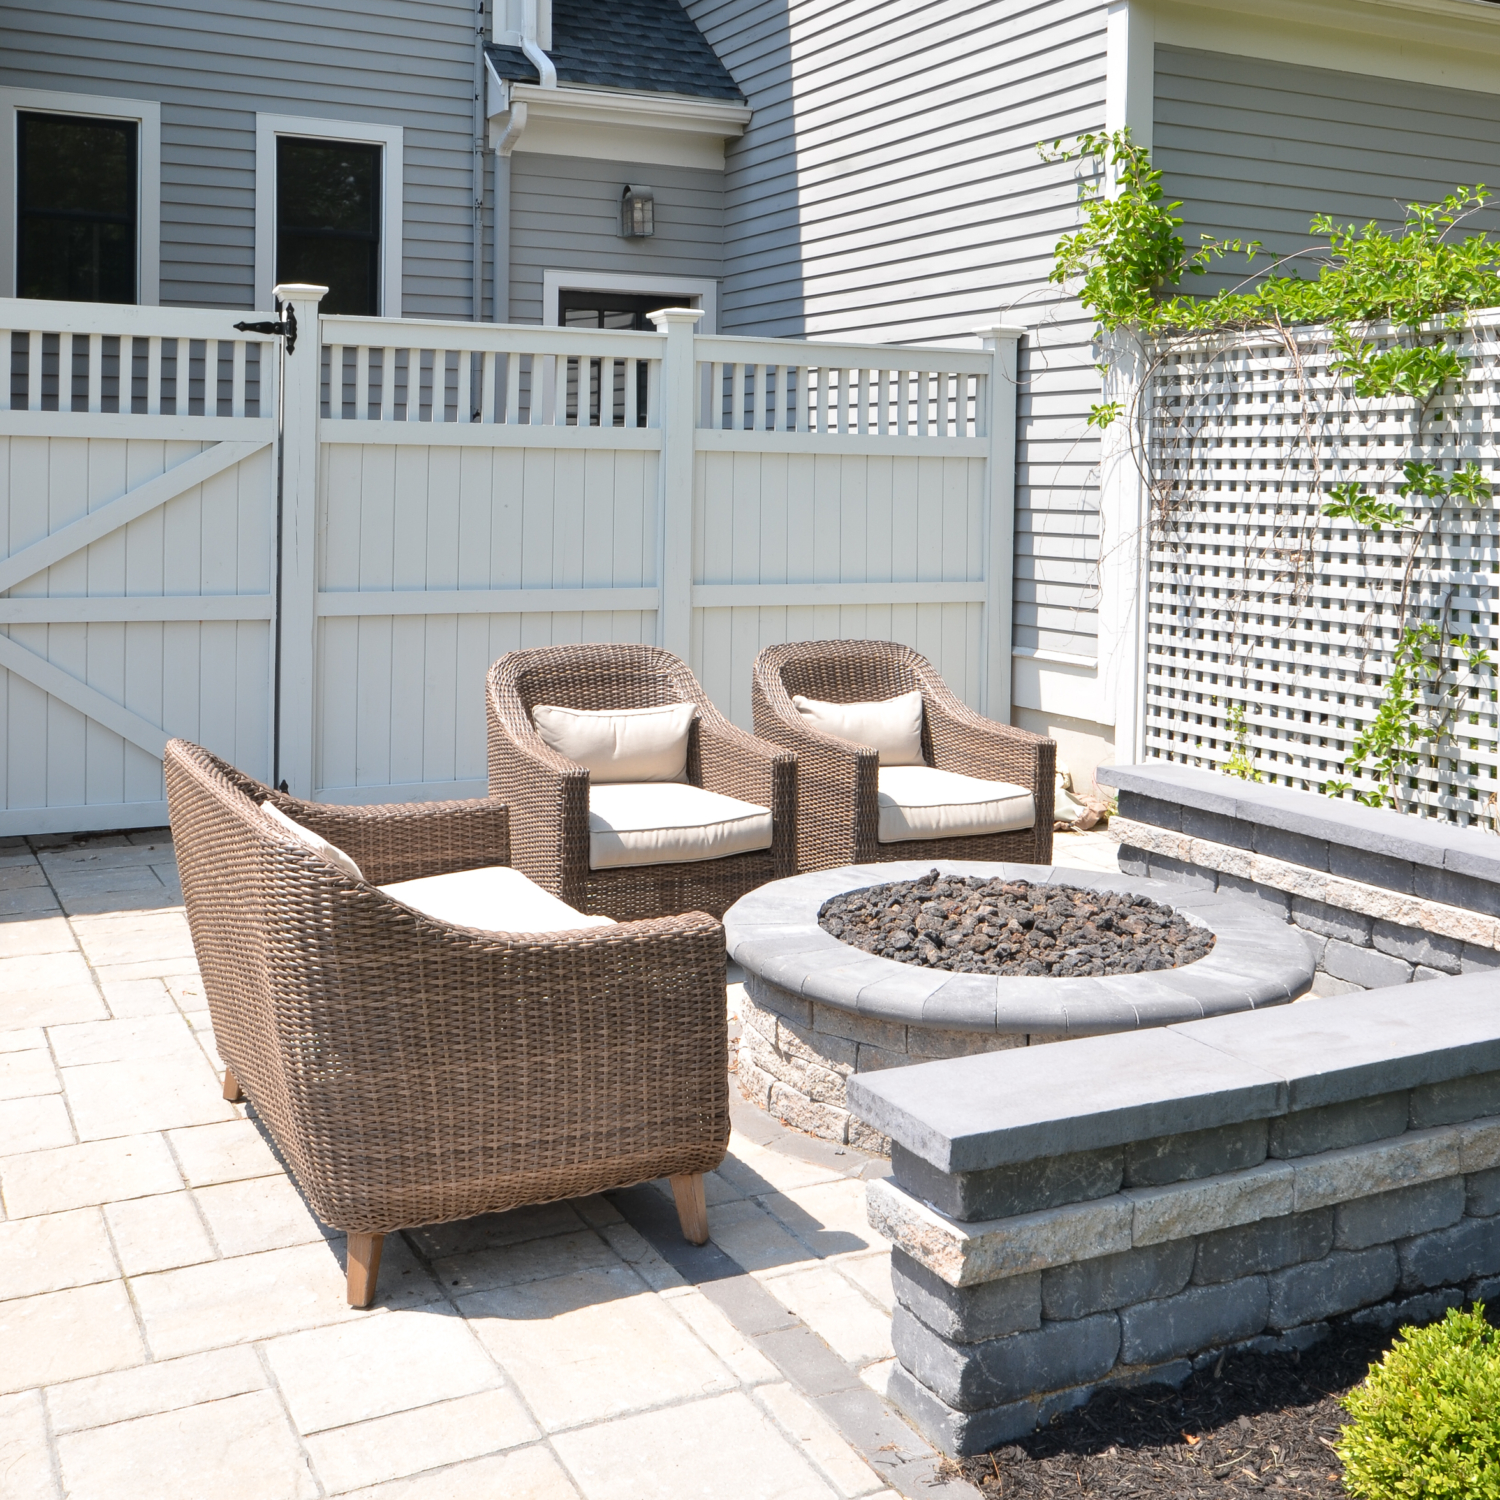 Amazing backyard landscaping makeover that includes a Trex deck, a paver patio with gas firepit, and a paver patio with a fountain and benches. So much outdoor inspiration!